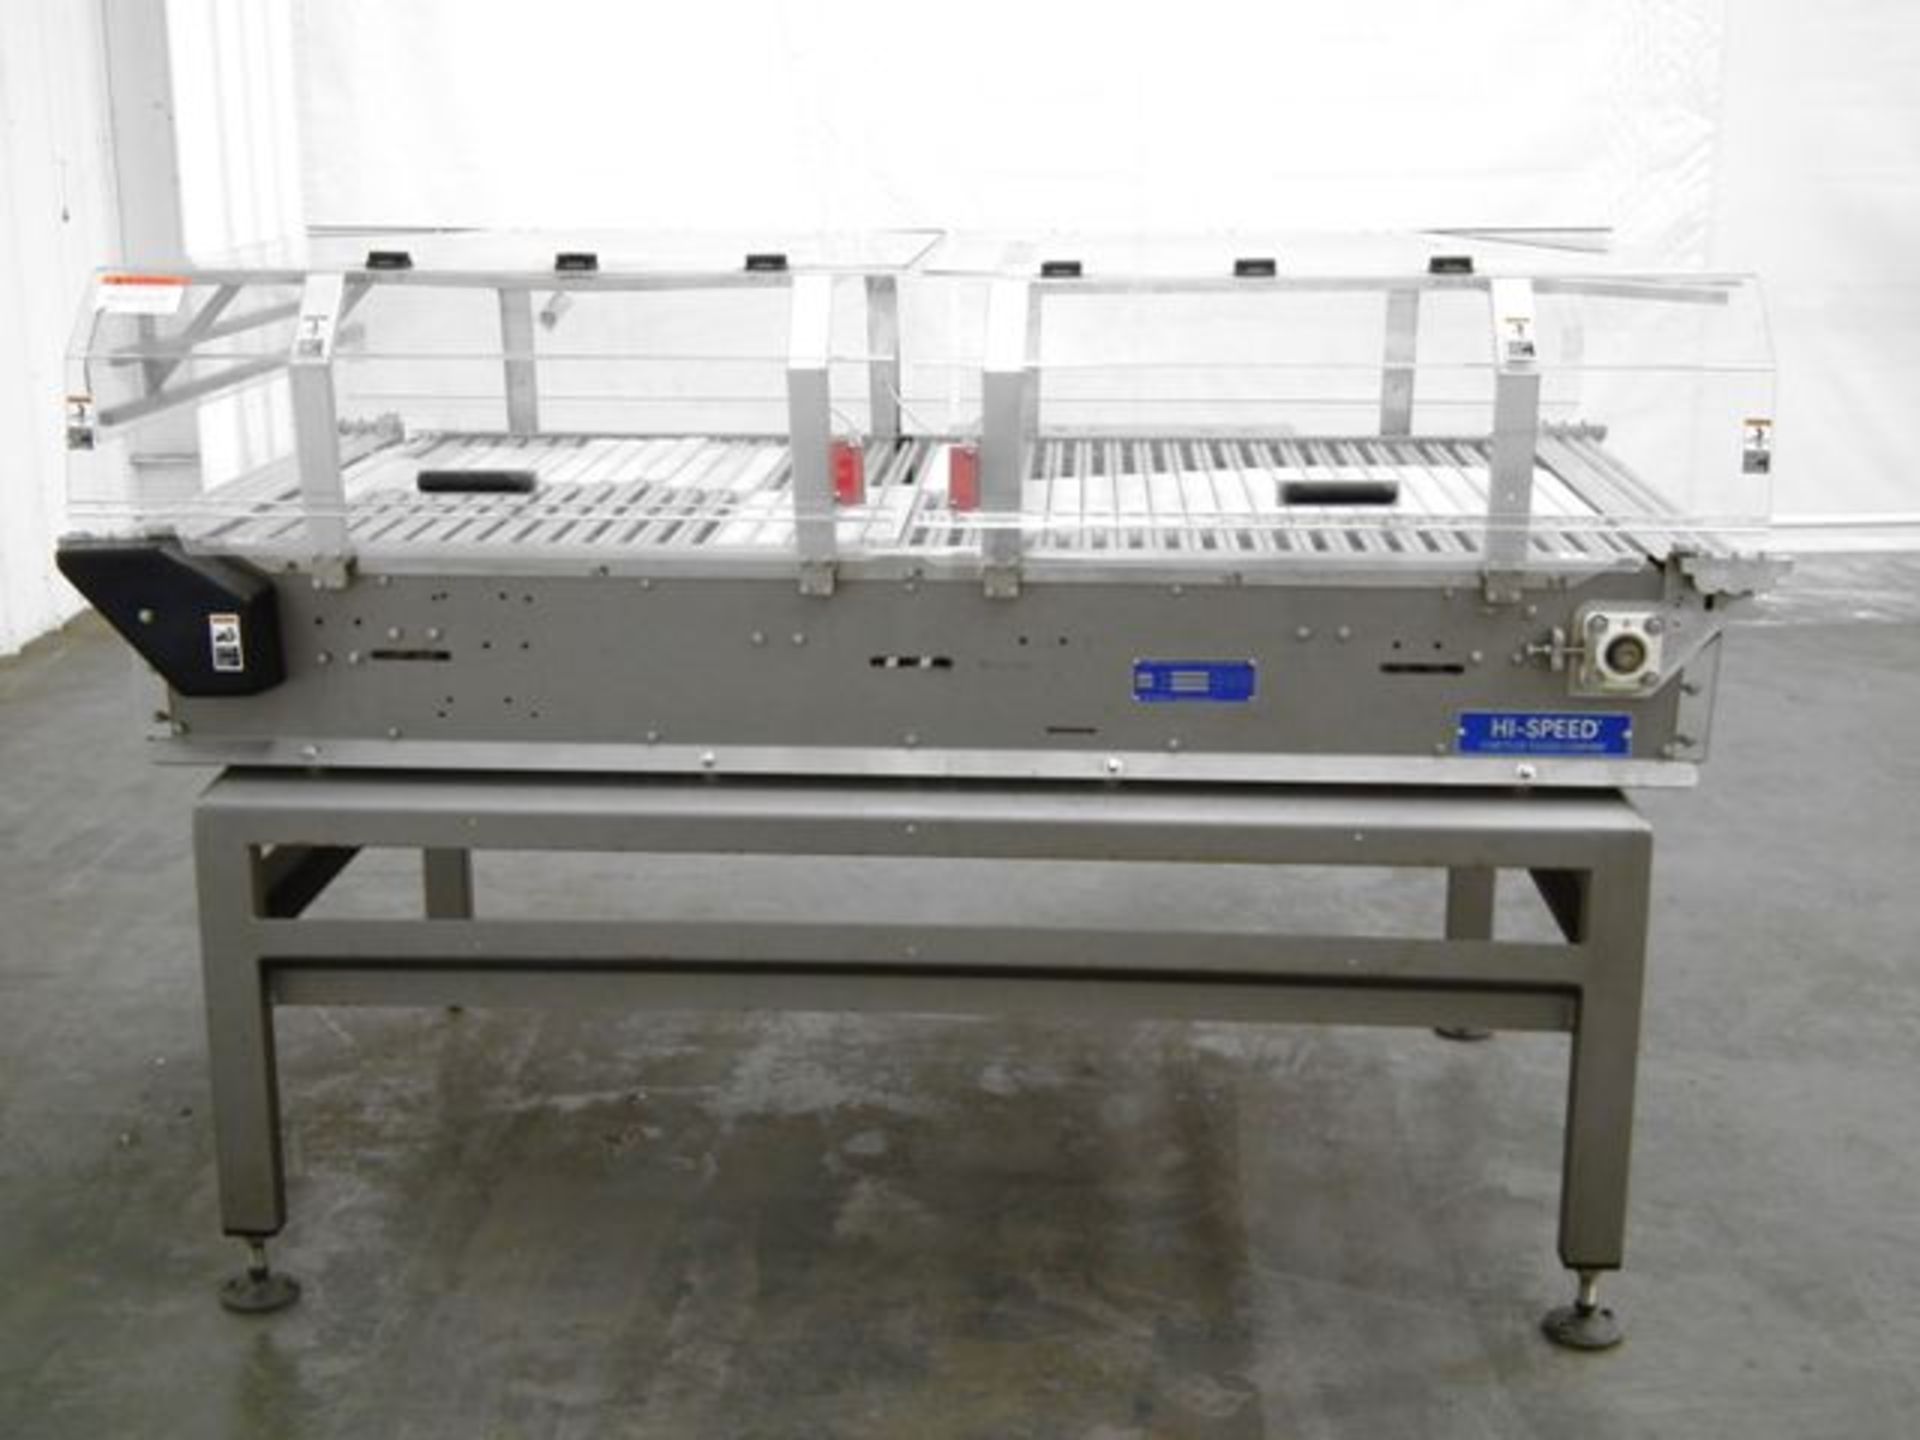 Hi-Speed Alignment Conveyor - RIGGING AND HANDLING FEES: $190